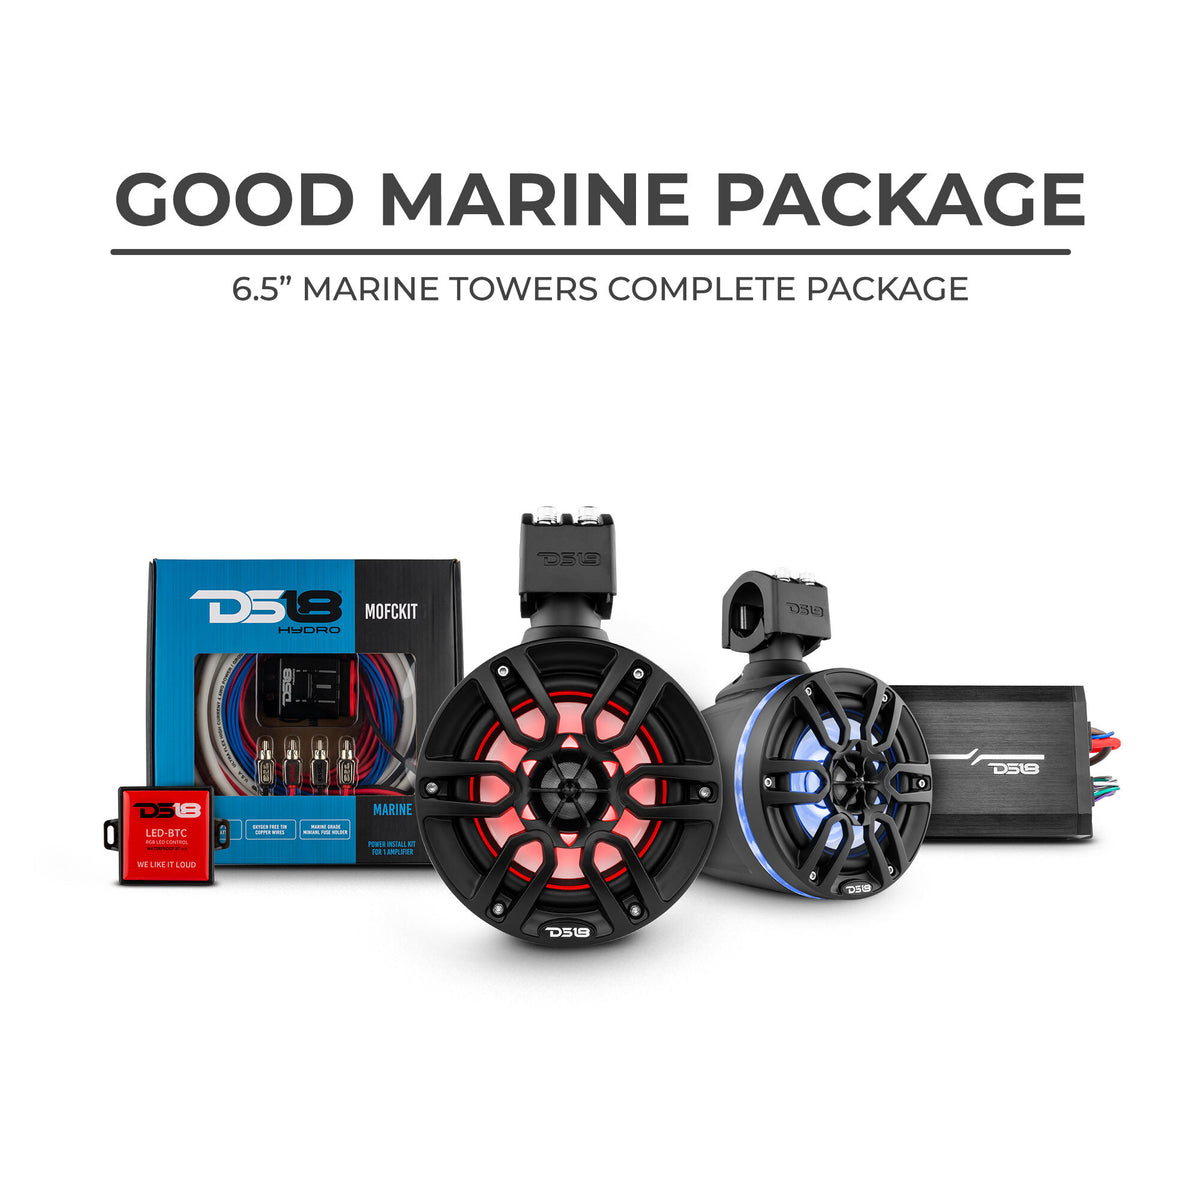 DS18 Good Marine Stereo Package  2 x 6.5” Speaker Tower| 1 x 2 Ch Amplifier | 1 x MOFCKIT4 and 1 x LED-BTC